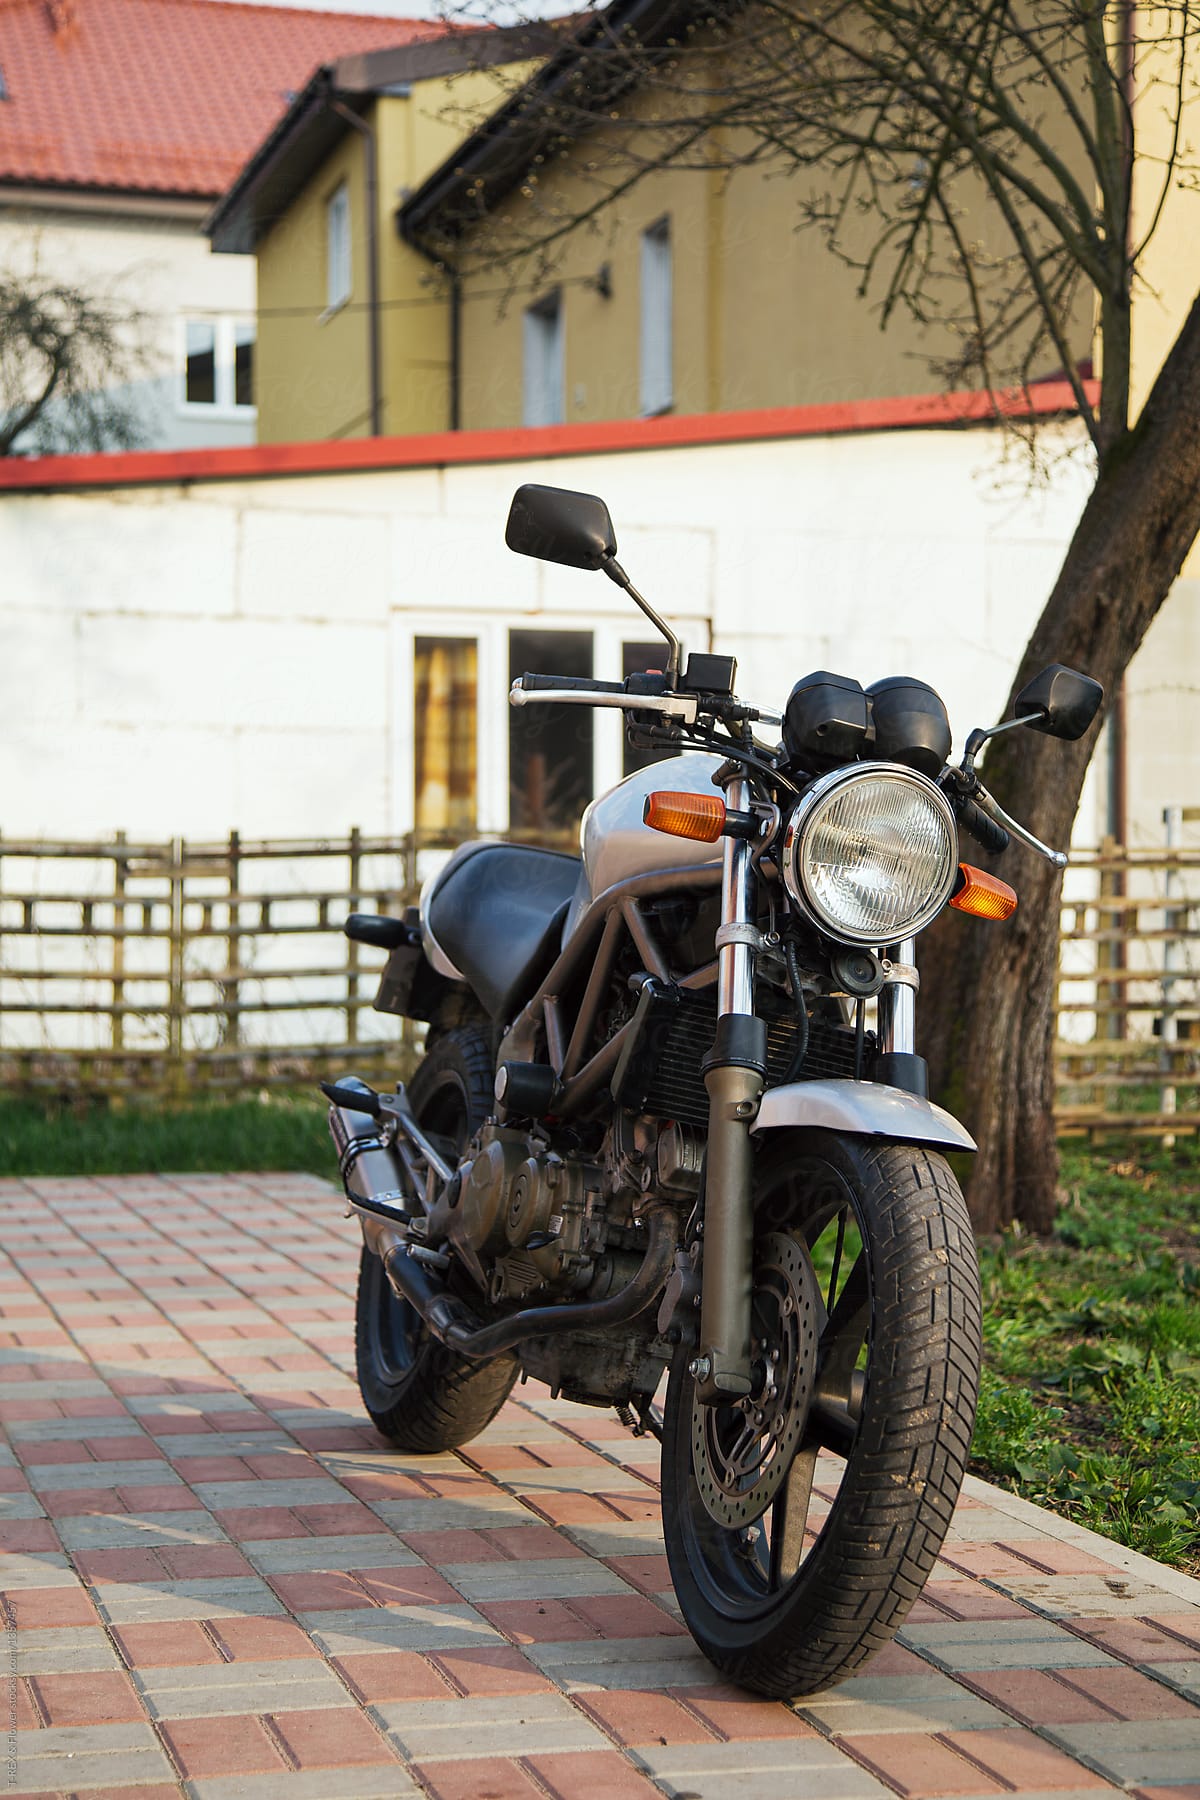 Front view of motorbike